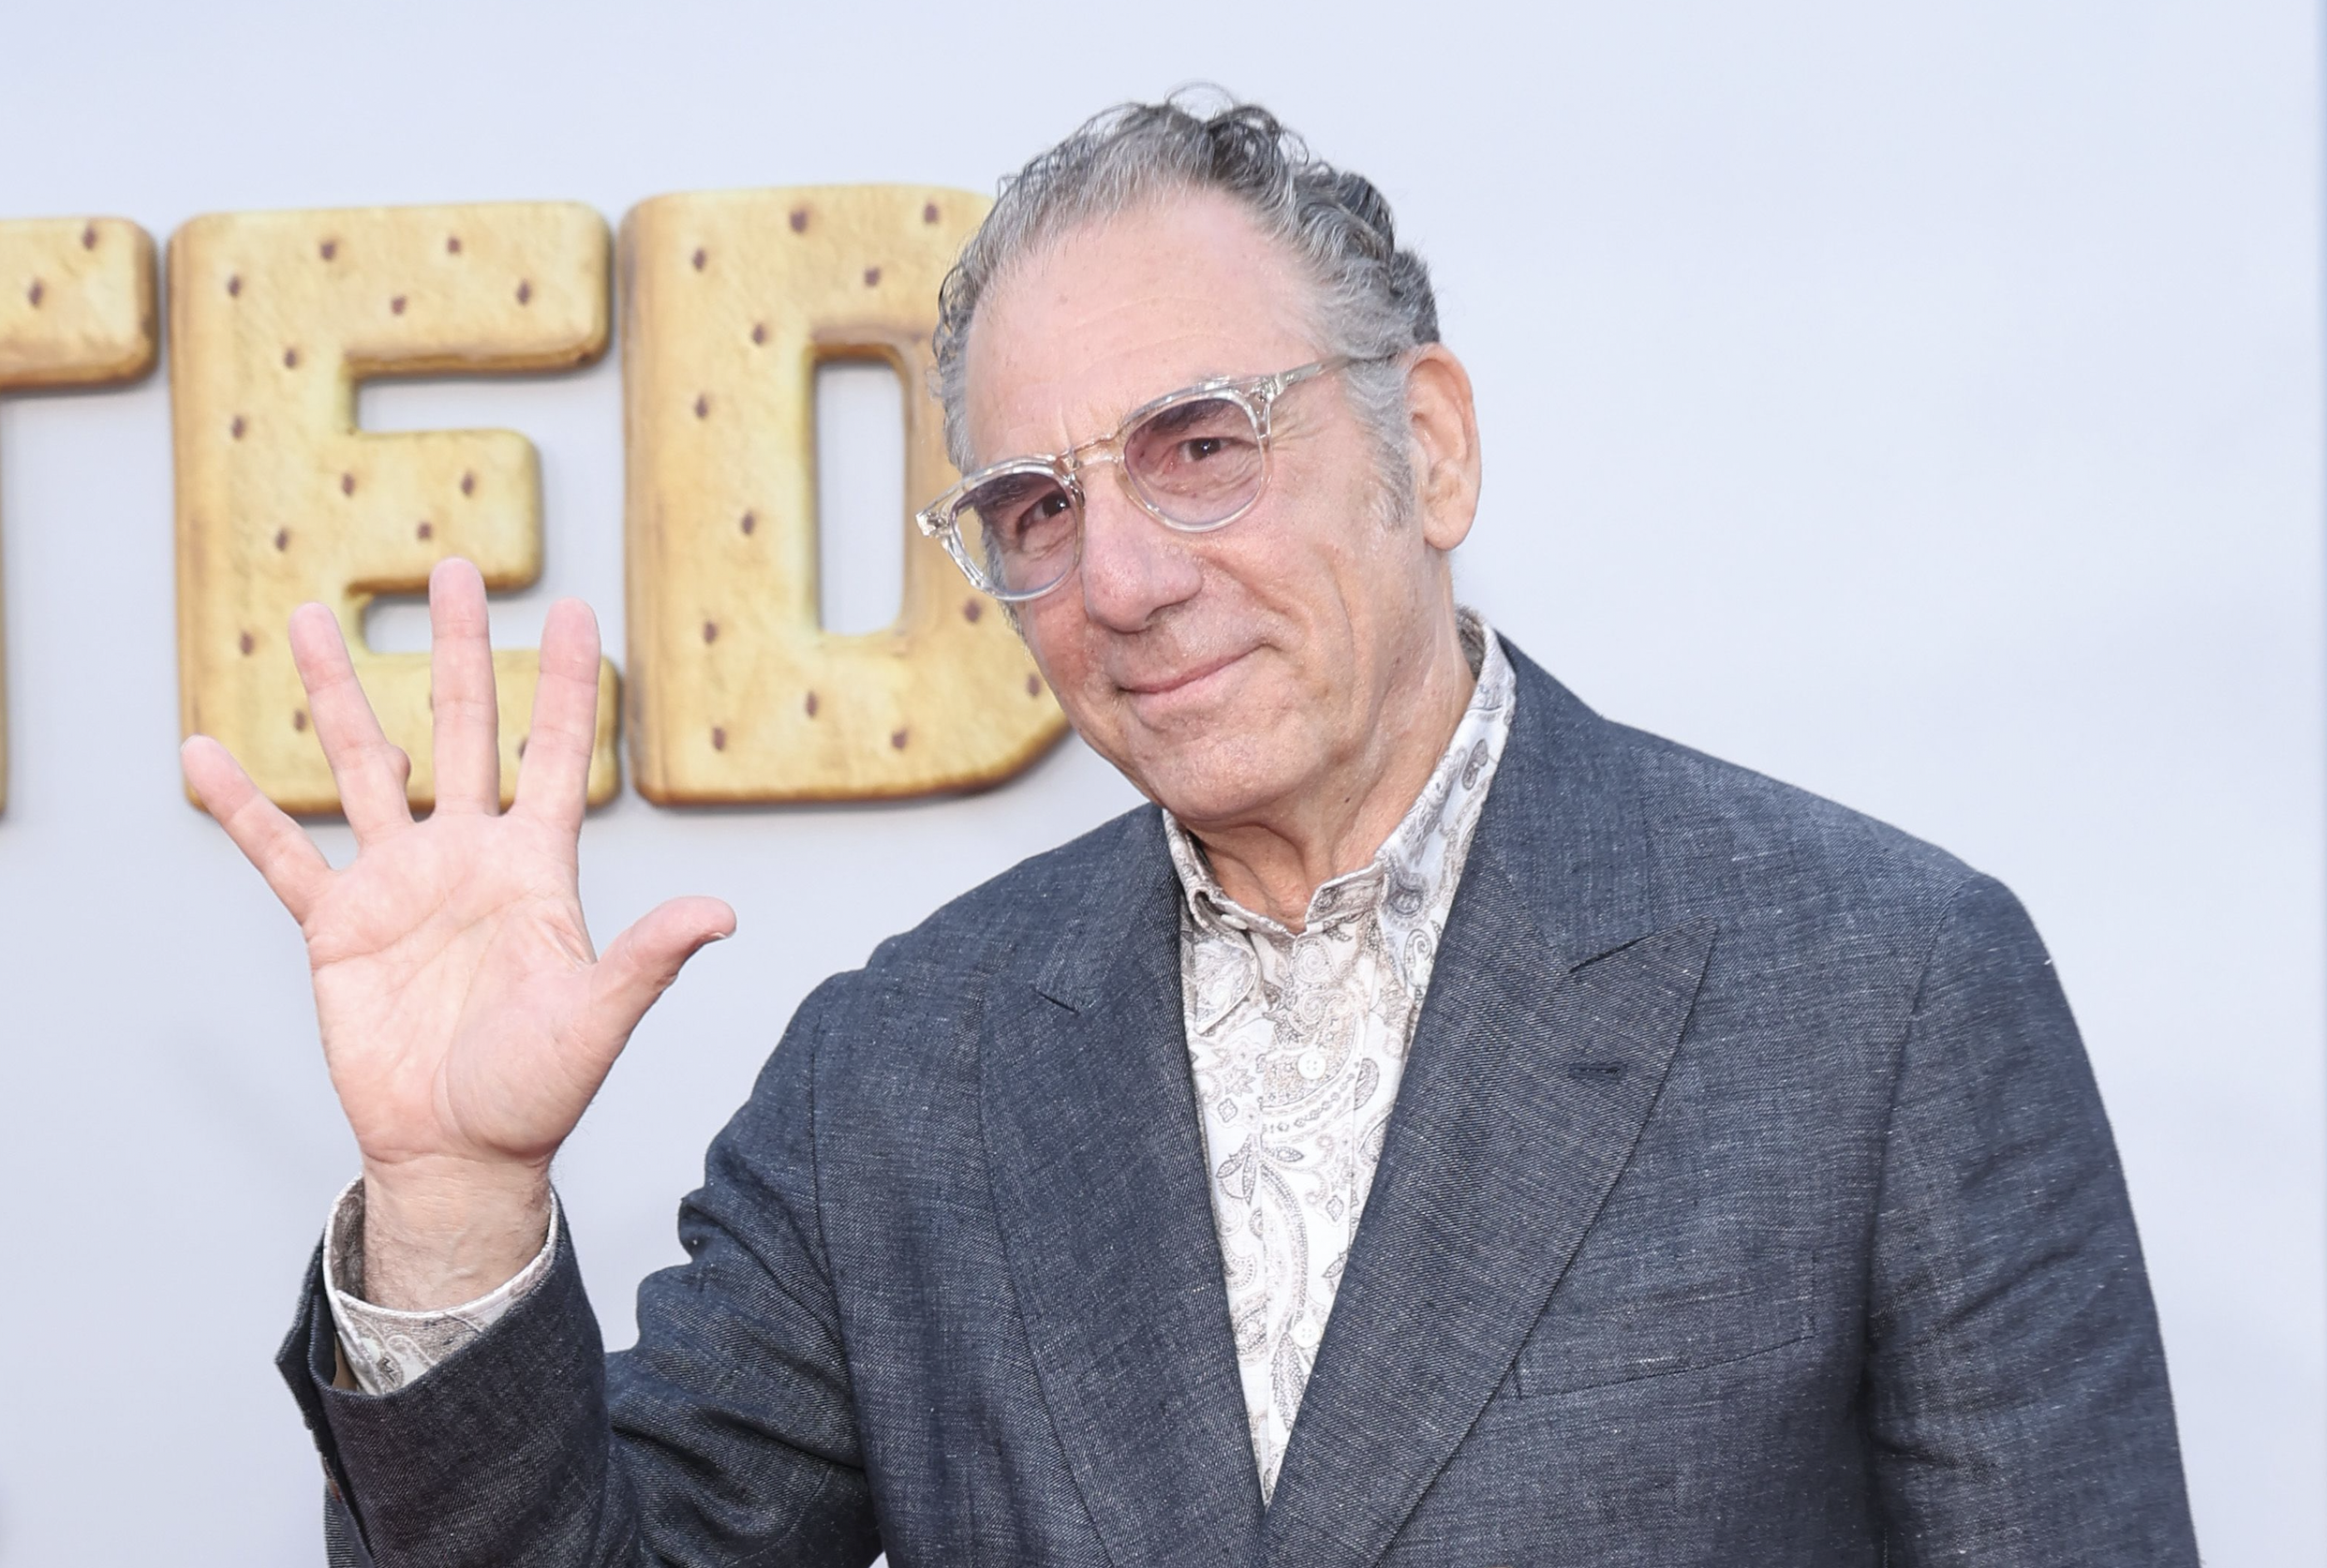 ‘Seinfeld’ Star Michael Richards Says ‘I’m Not Racist’ or ‘Looking for a Comeback,’ Nearly 18 Years After Racist Outburst: ‘I Have...